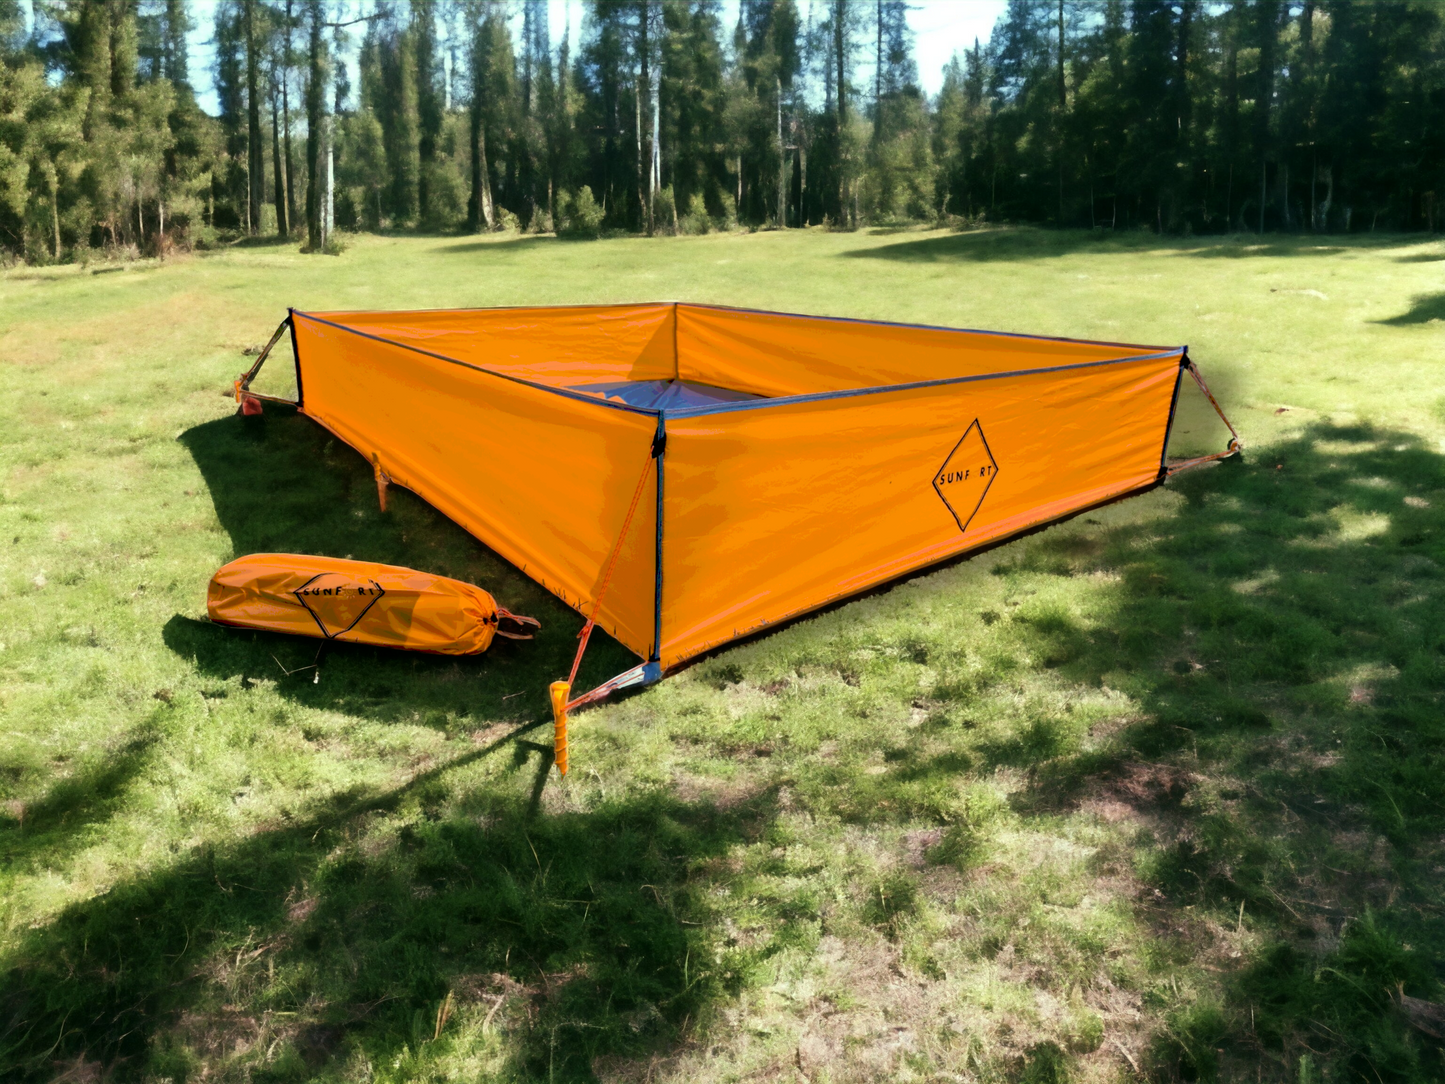 SunFort Portable Walled Blanket (Multi Color Options) - The Sun Fort